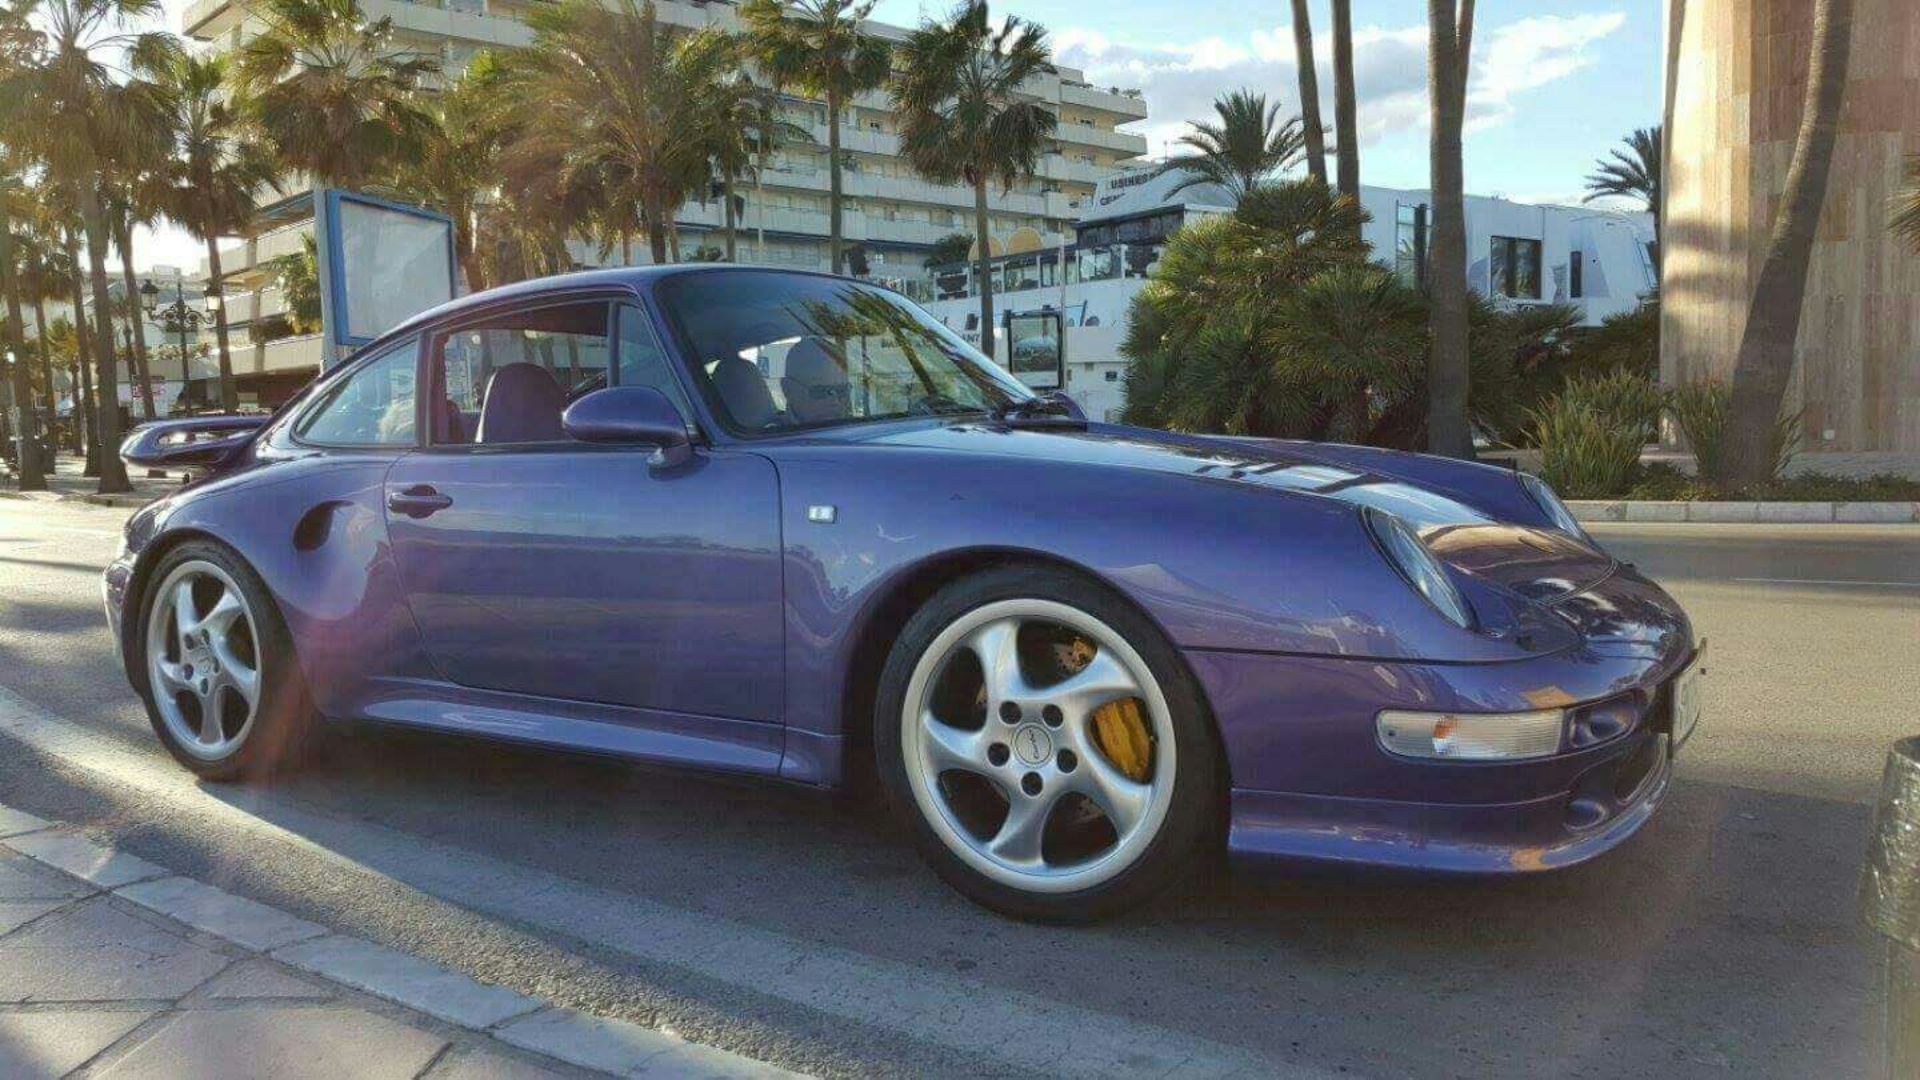 1997 993 Porsche Turbo S - One of a kind